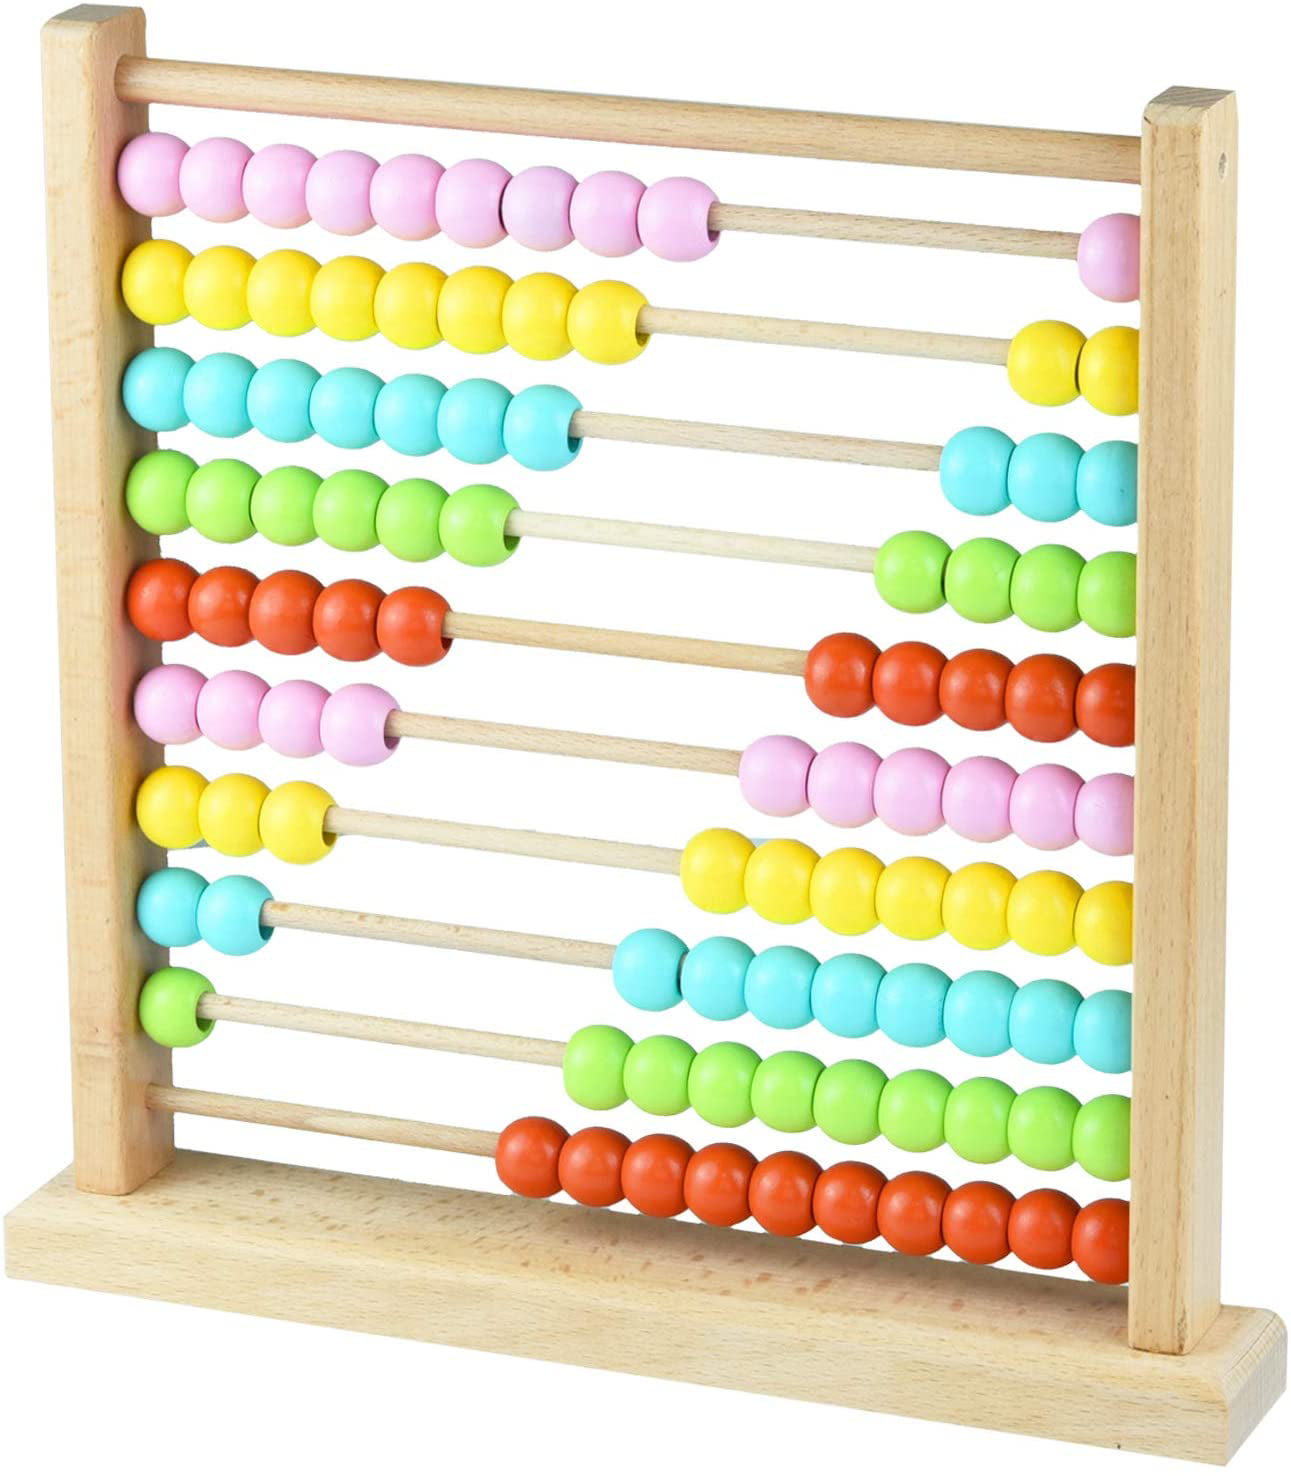 Wooden Bead Abacus Kids Educational Math Learning Colourful Toy Counting Numbers 